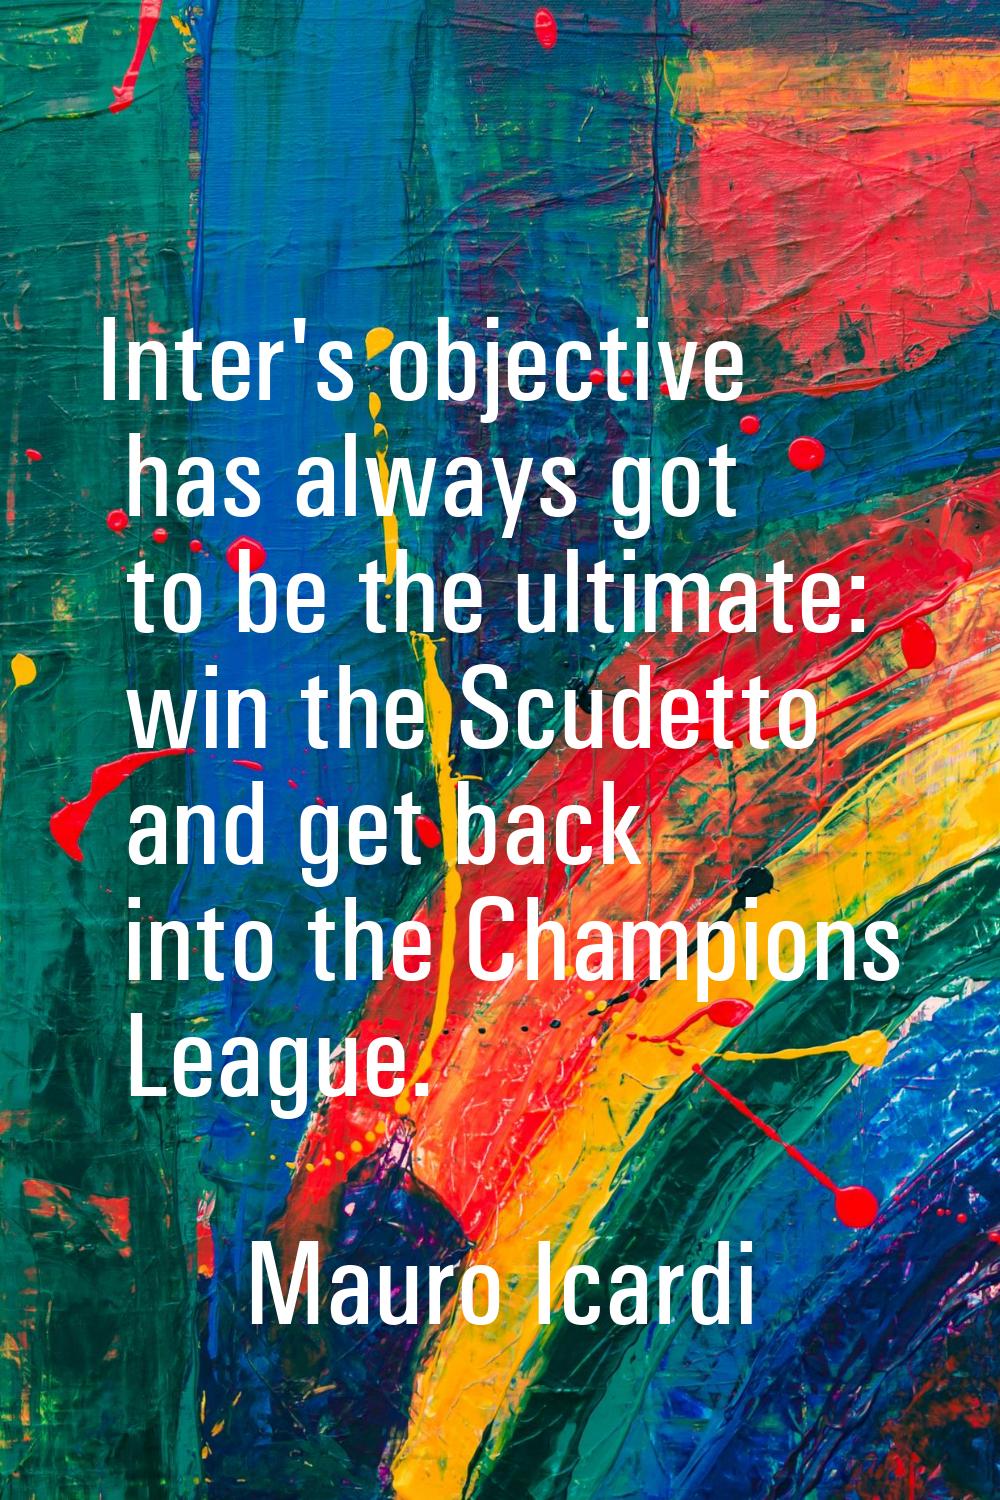 Inter's objective has always got to be the ultimate: win the Scudetto and get back into the Champio